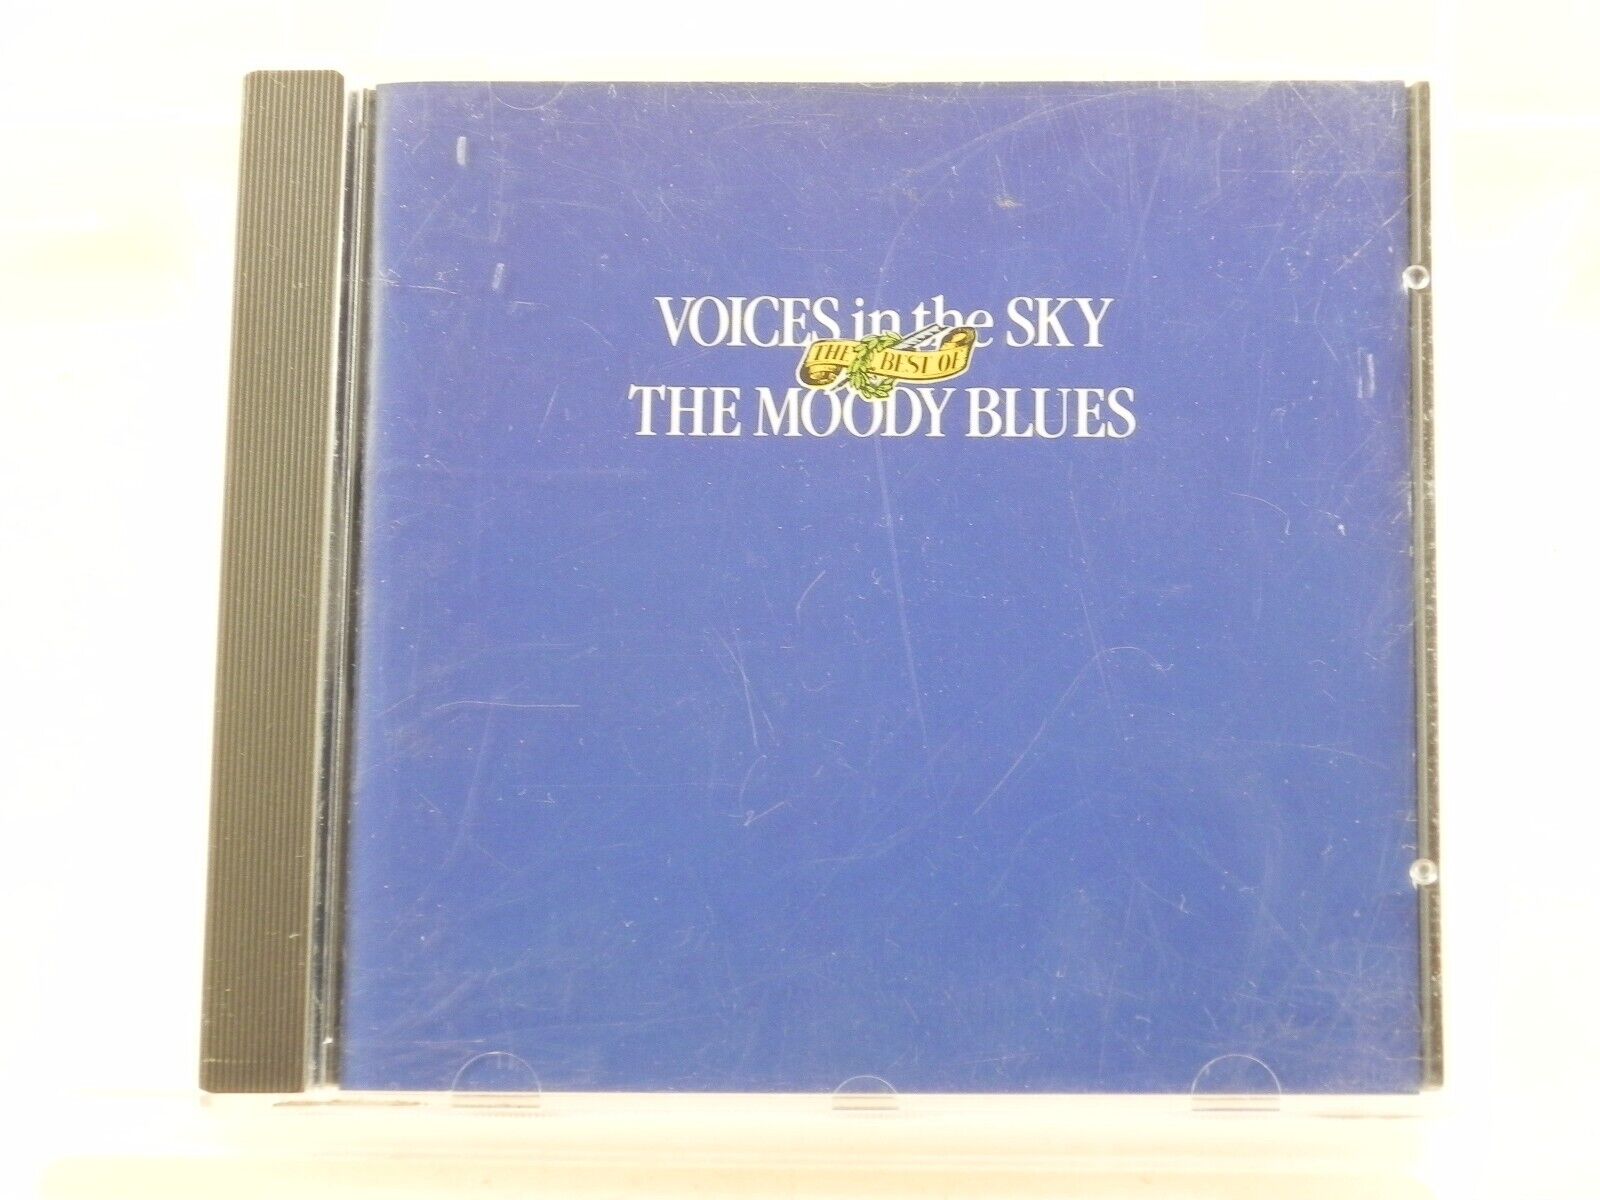 Voices in the Sky: The Best of the Moody Blues CD (1991)